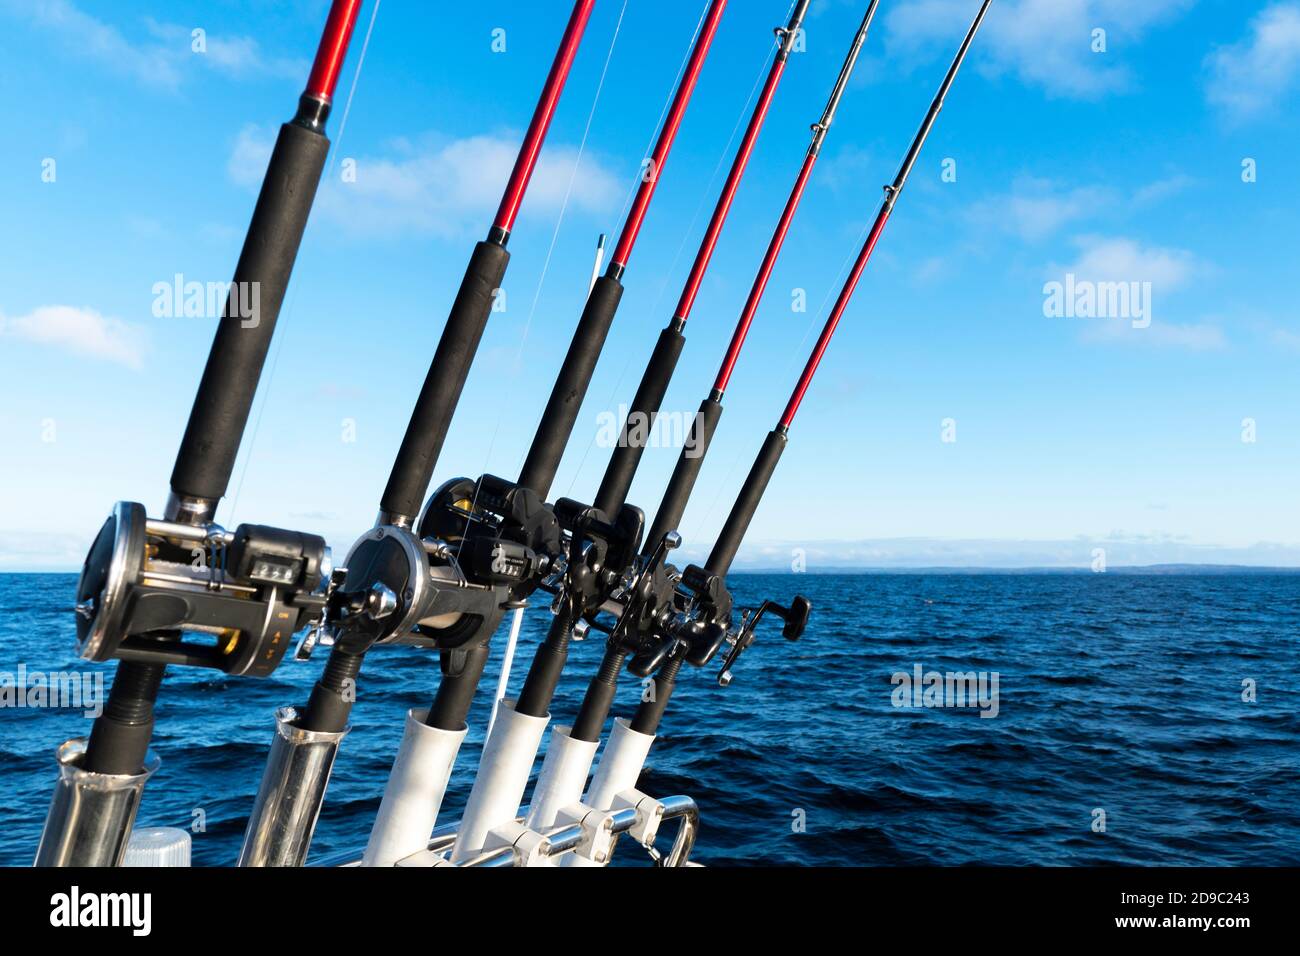 https://c8.alamy.com/comp/2D9C243/fishing-trolling-boat-rods-in-rod-holder-big-game-fishing-fishing-reels-and-rods-pattern-on-boat-sea-fishing-rods-and-reels-in-a-row-2D9C243.jpg